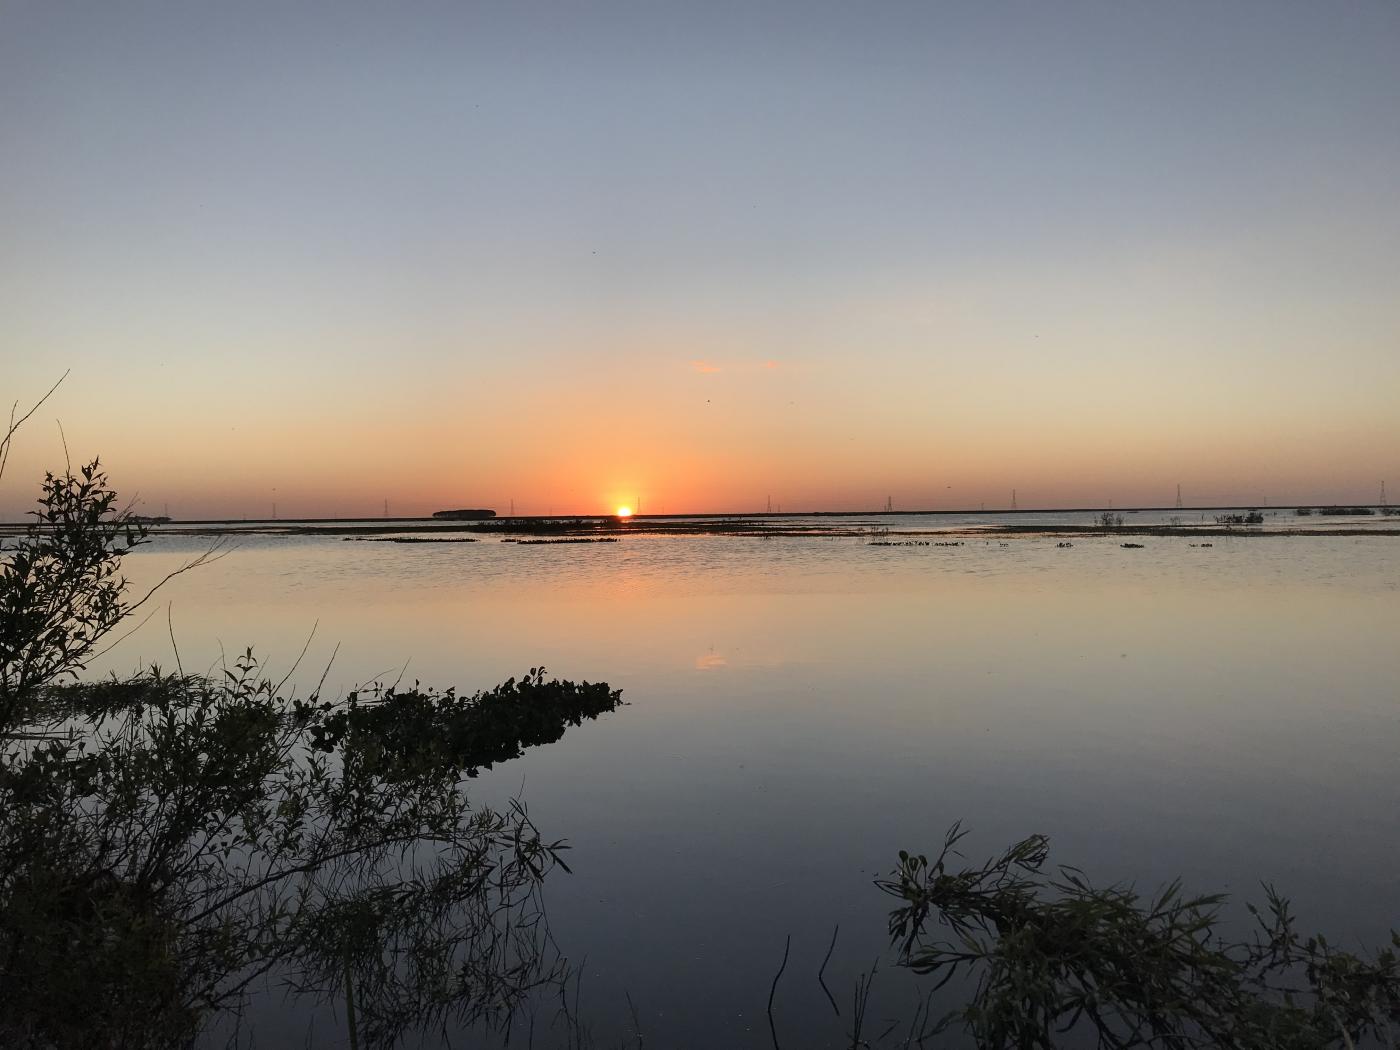 The sun setting over a body of water at Taim Ecological Station in Brazil